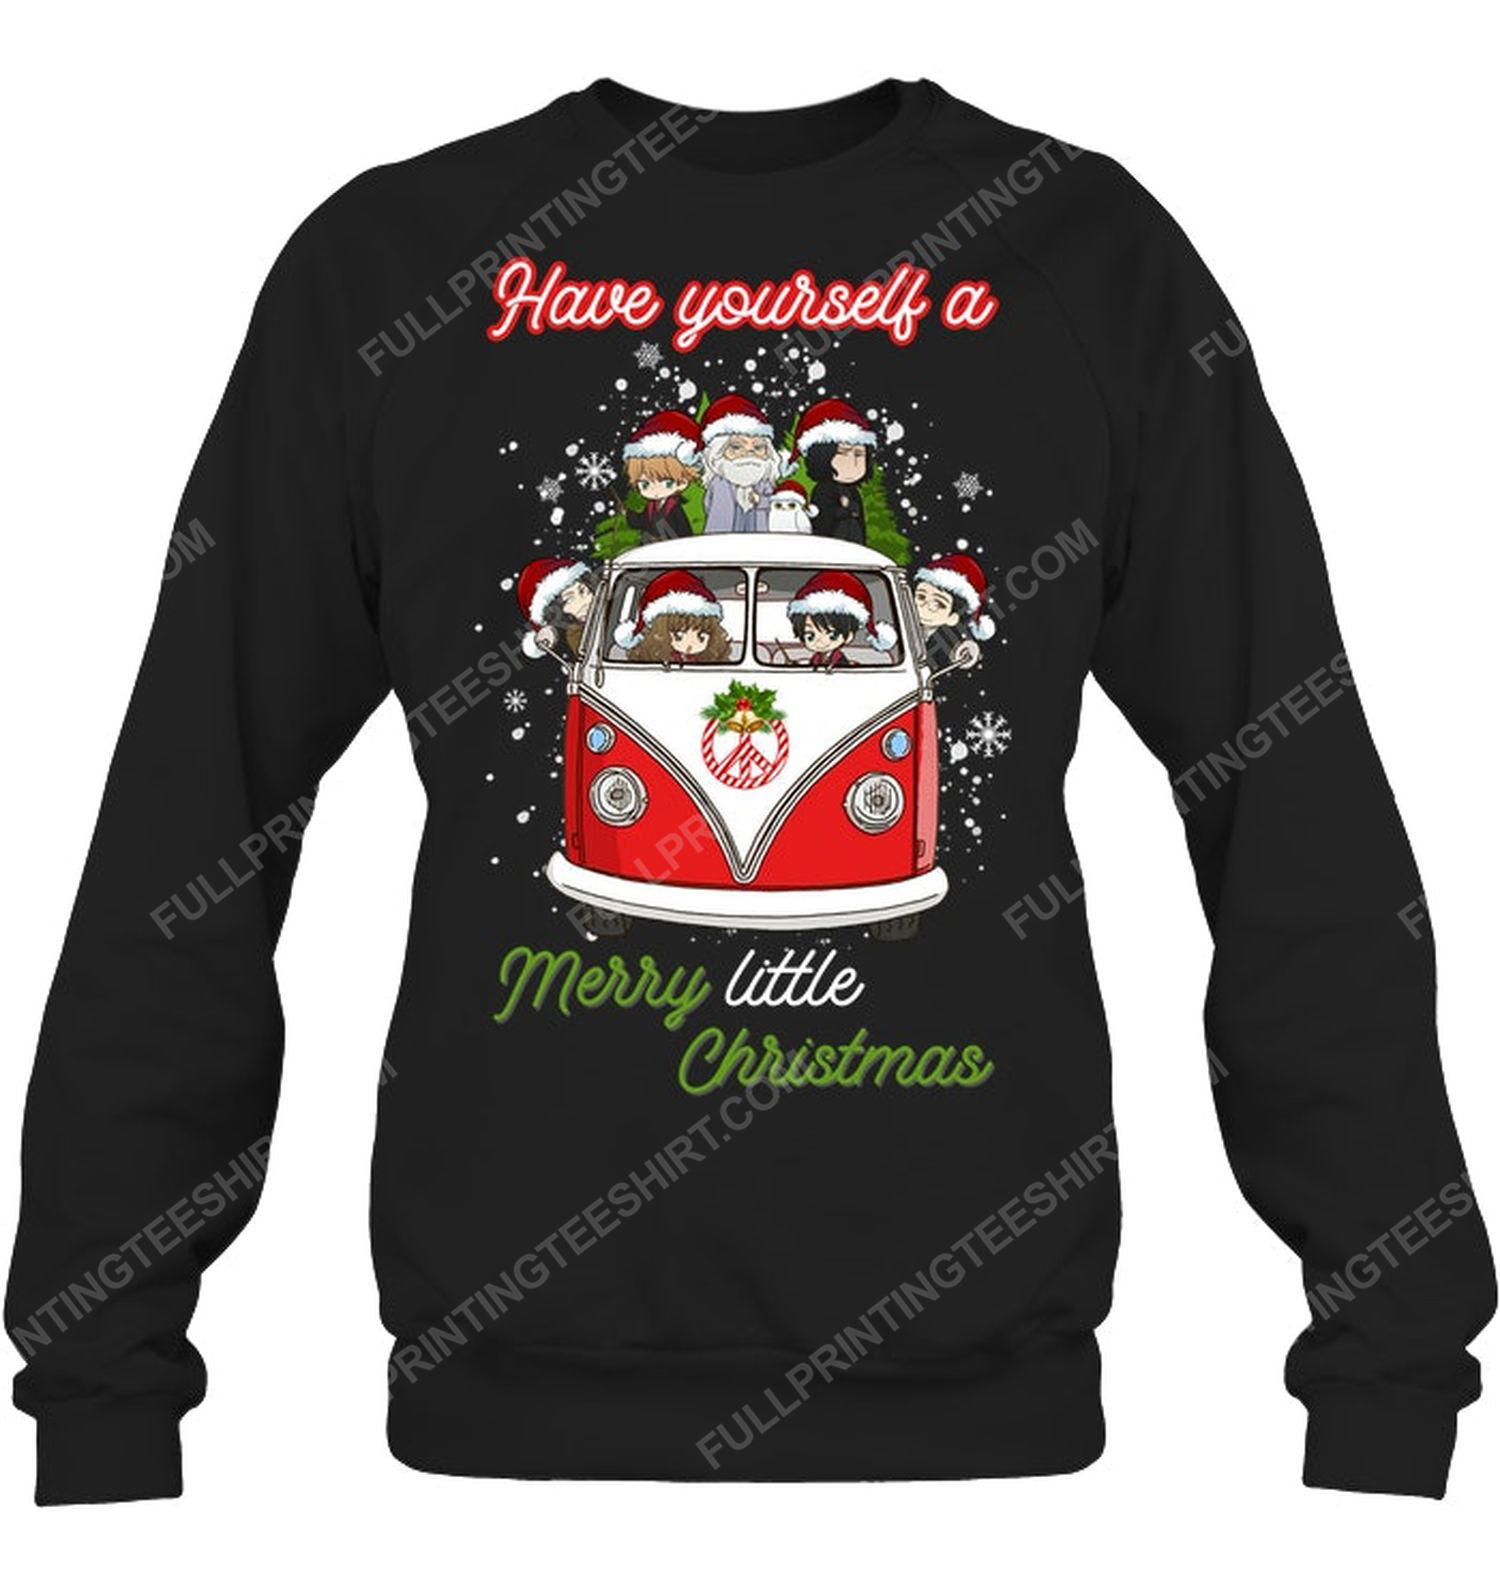 Harry potter characters have yourself a merry little christmas sweatshirt